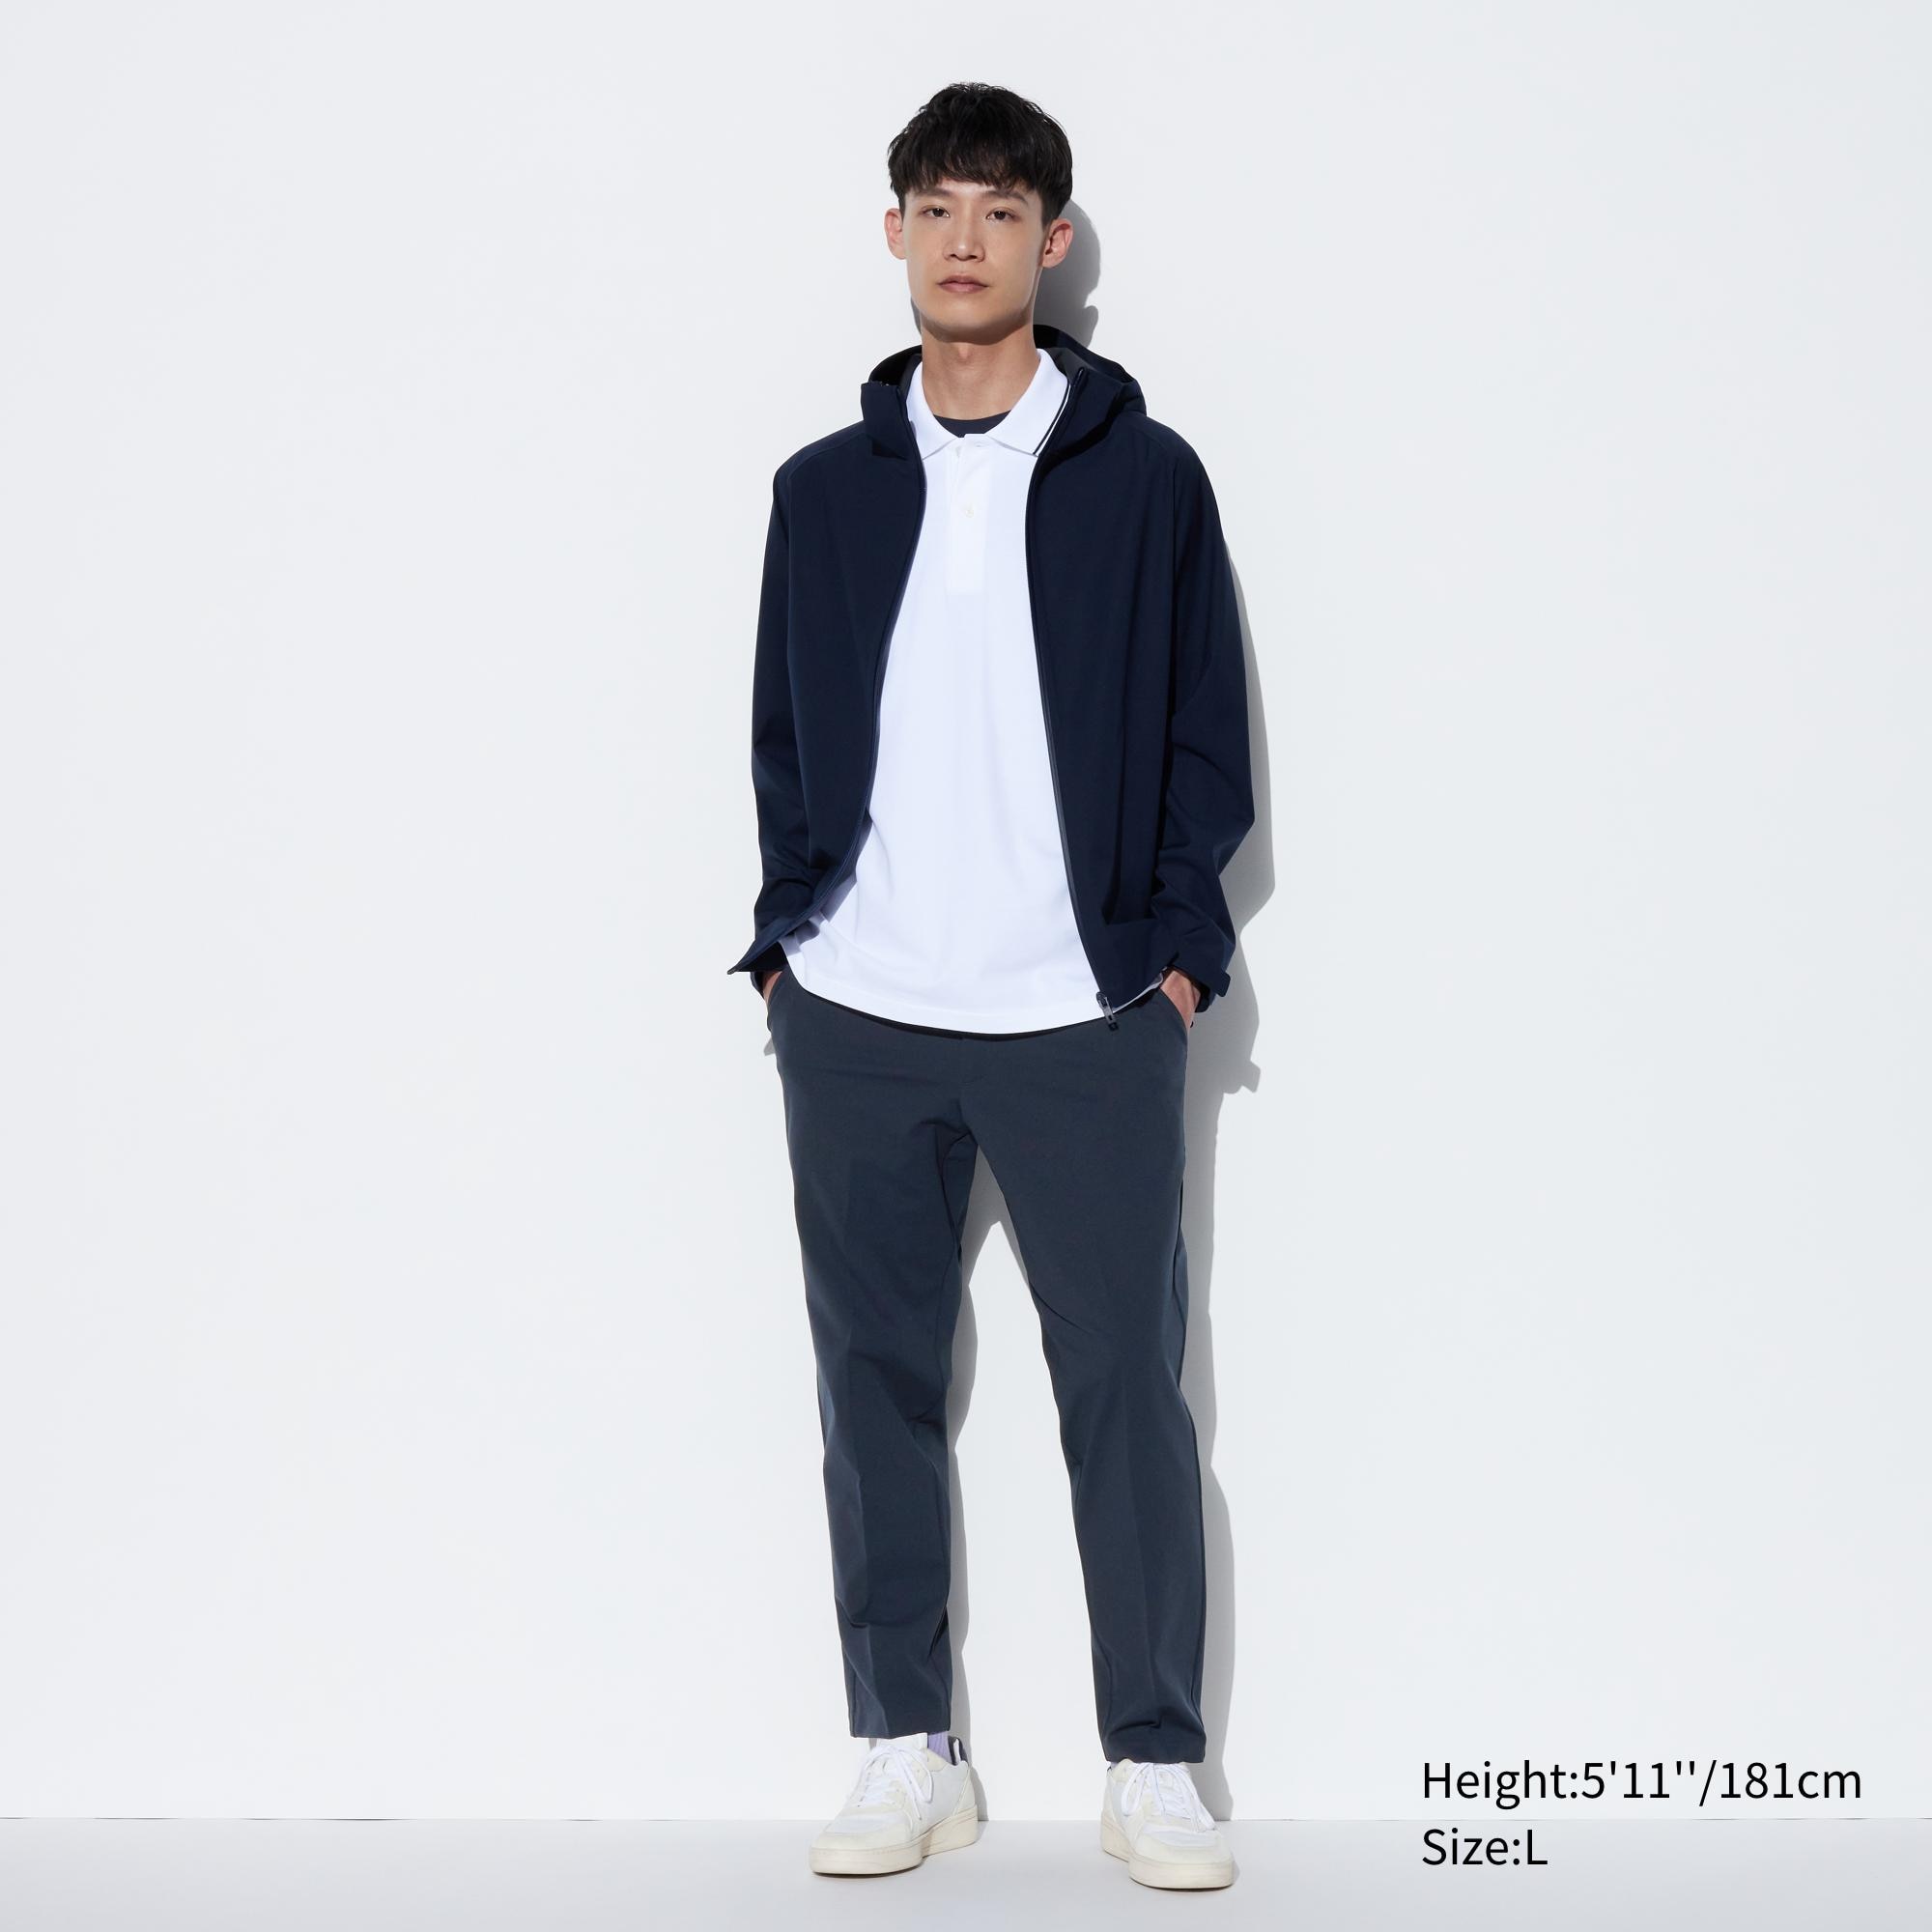 UNIQLO launches its latest Smart Ankle Pants Collection  2nd Opinion